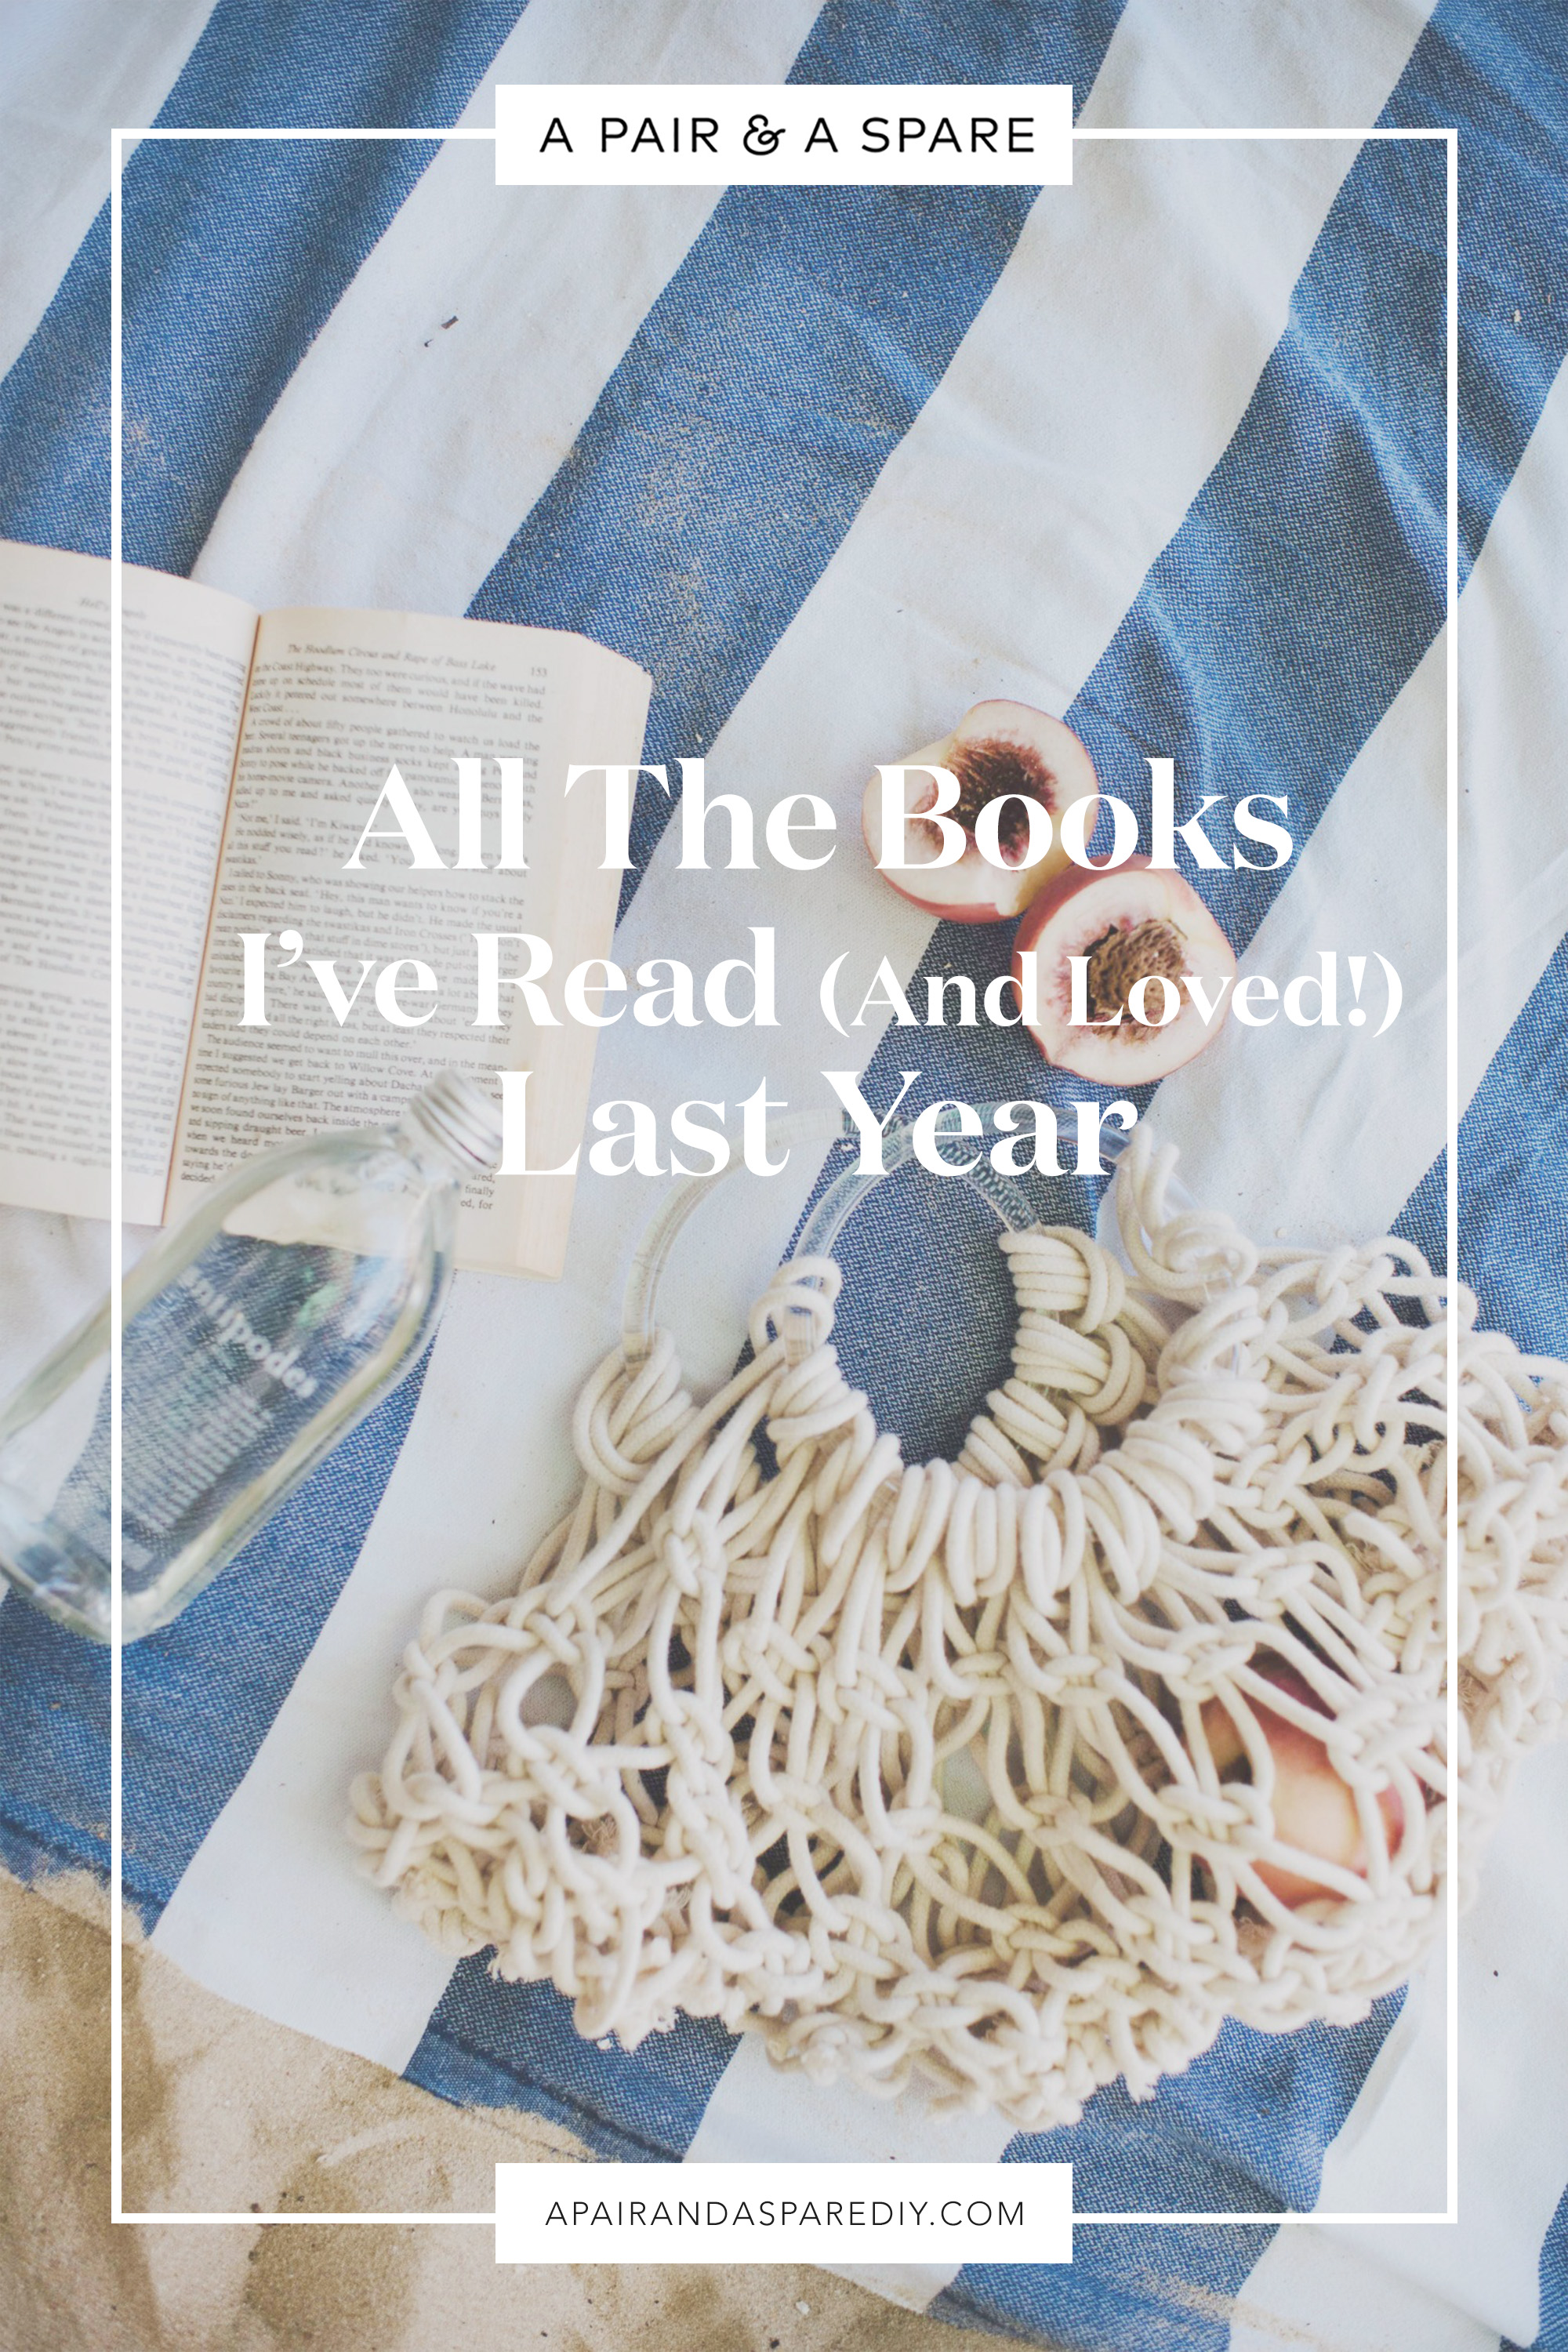 All the books I've Read (And Loved) In The Last Year